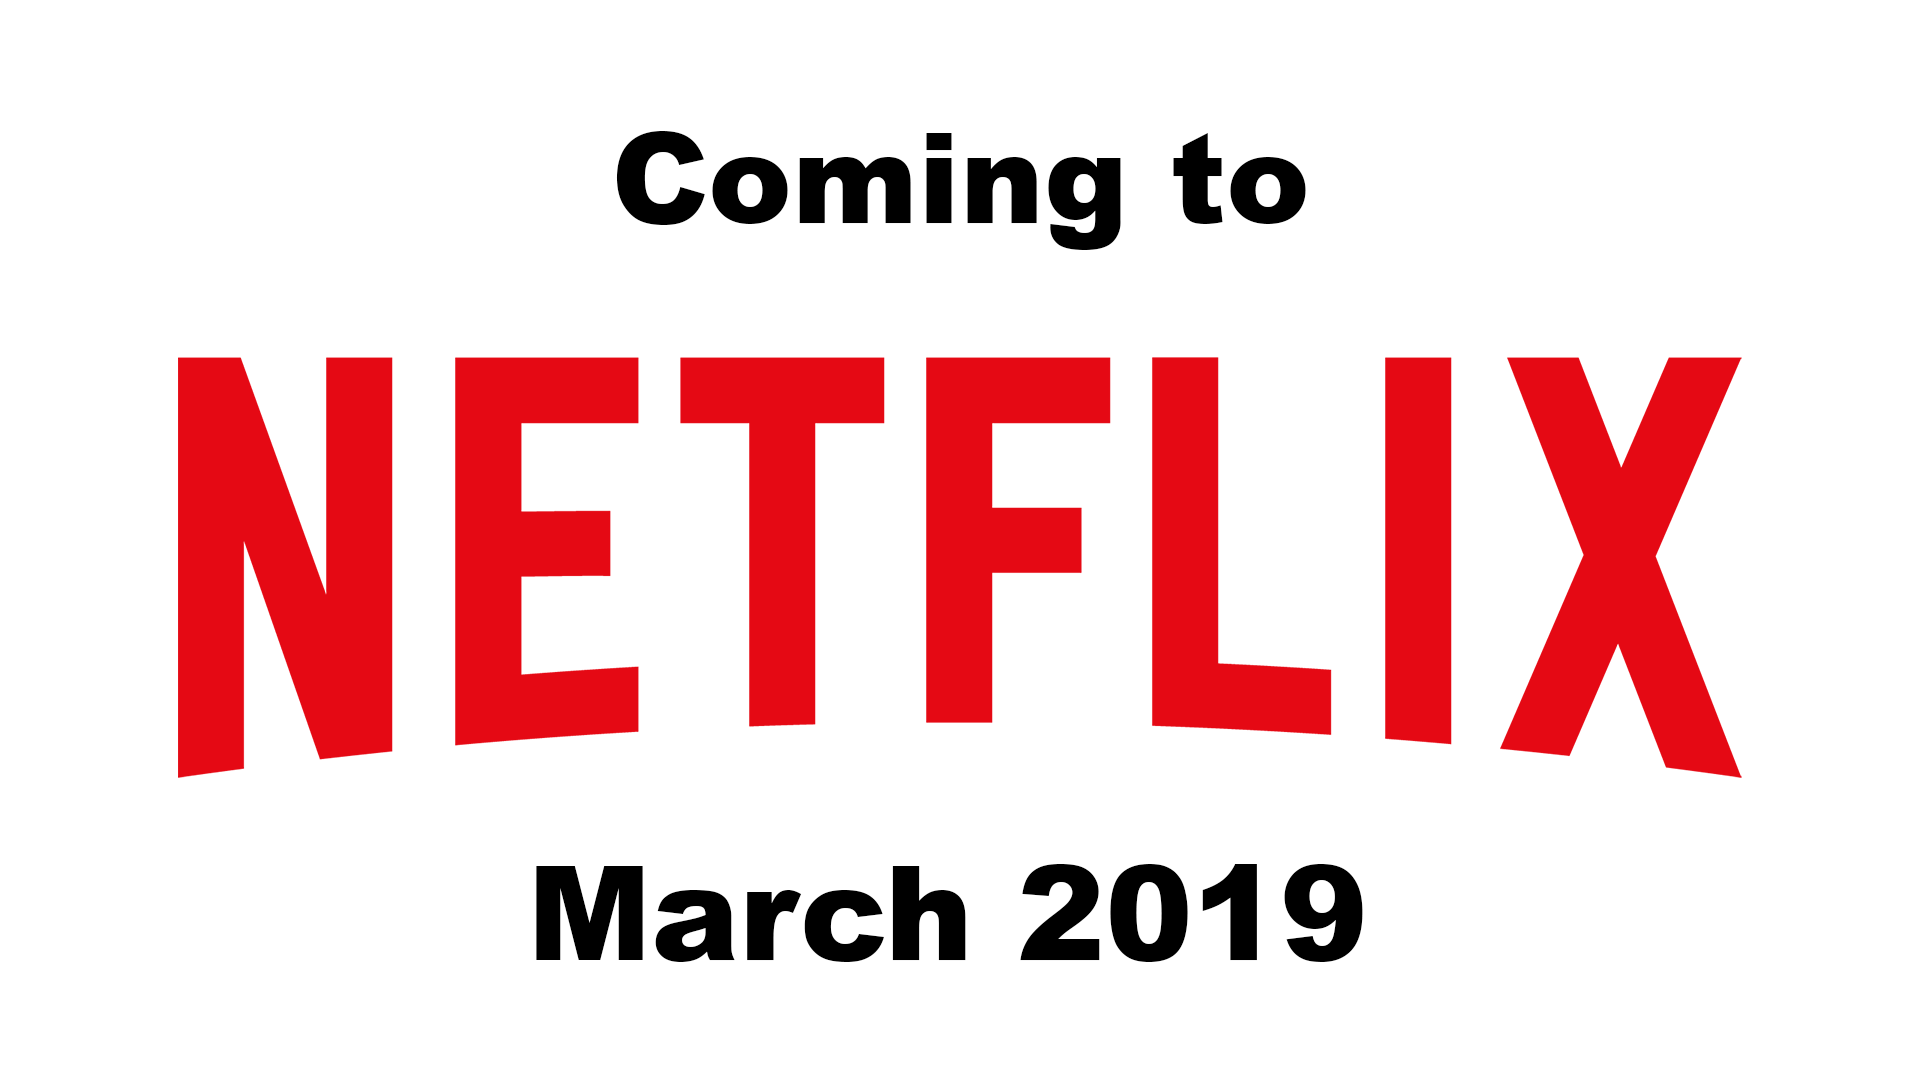 Coming to Netflix March 2019